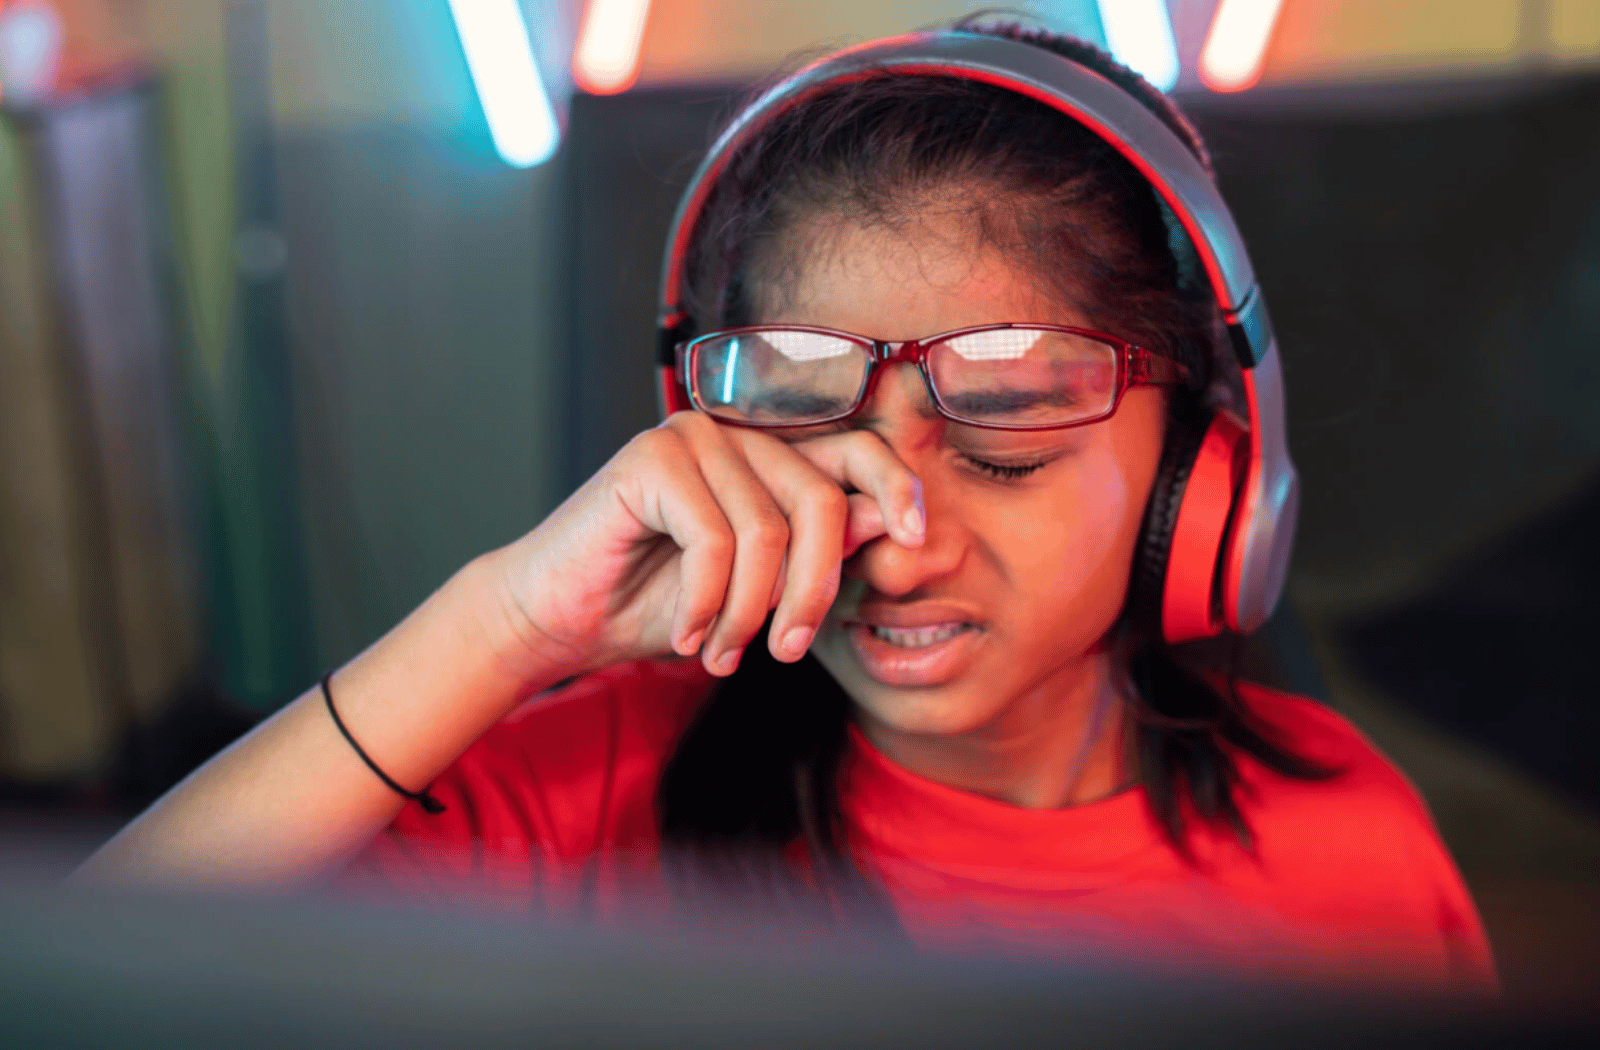 A young girl is rubbing her tired itchy eyes, she experiencing eye strain due to playing video games for a long period of time